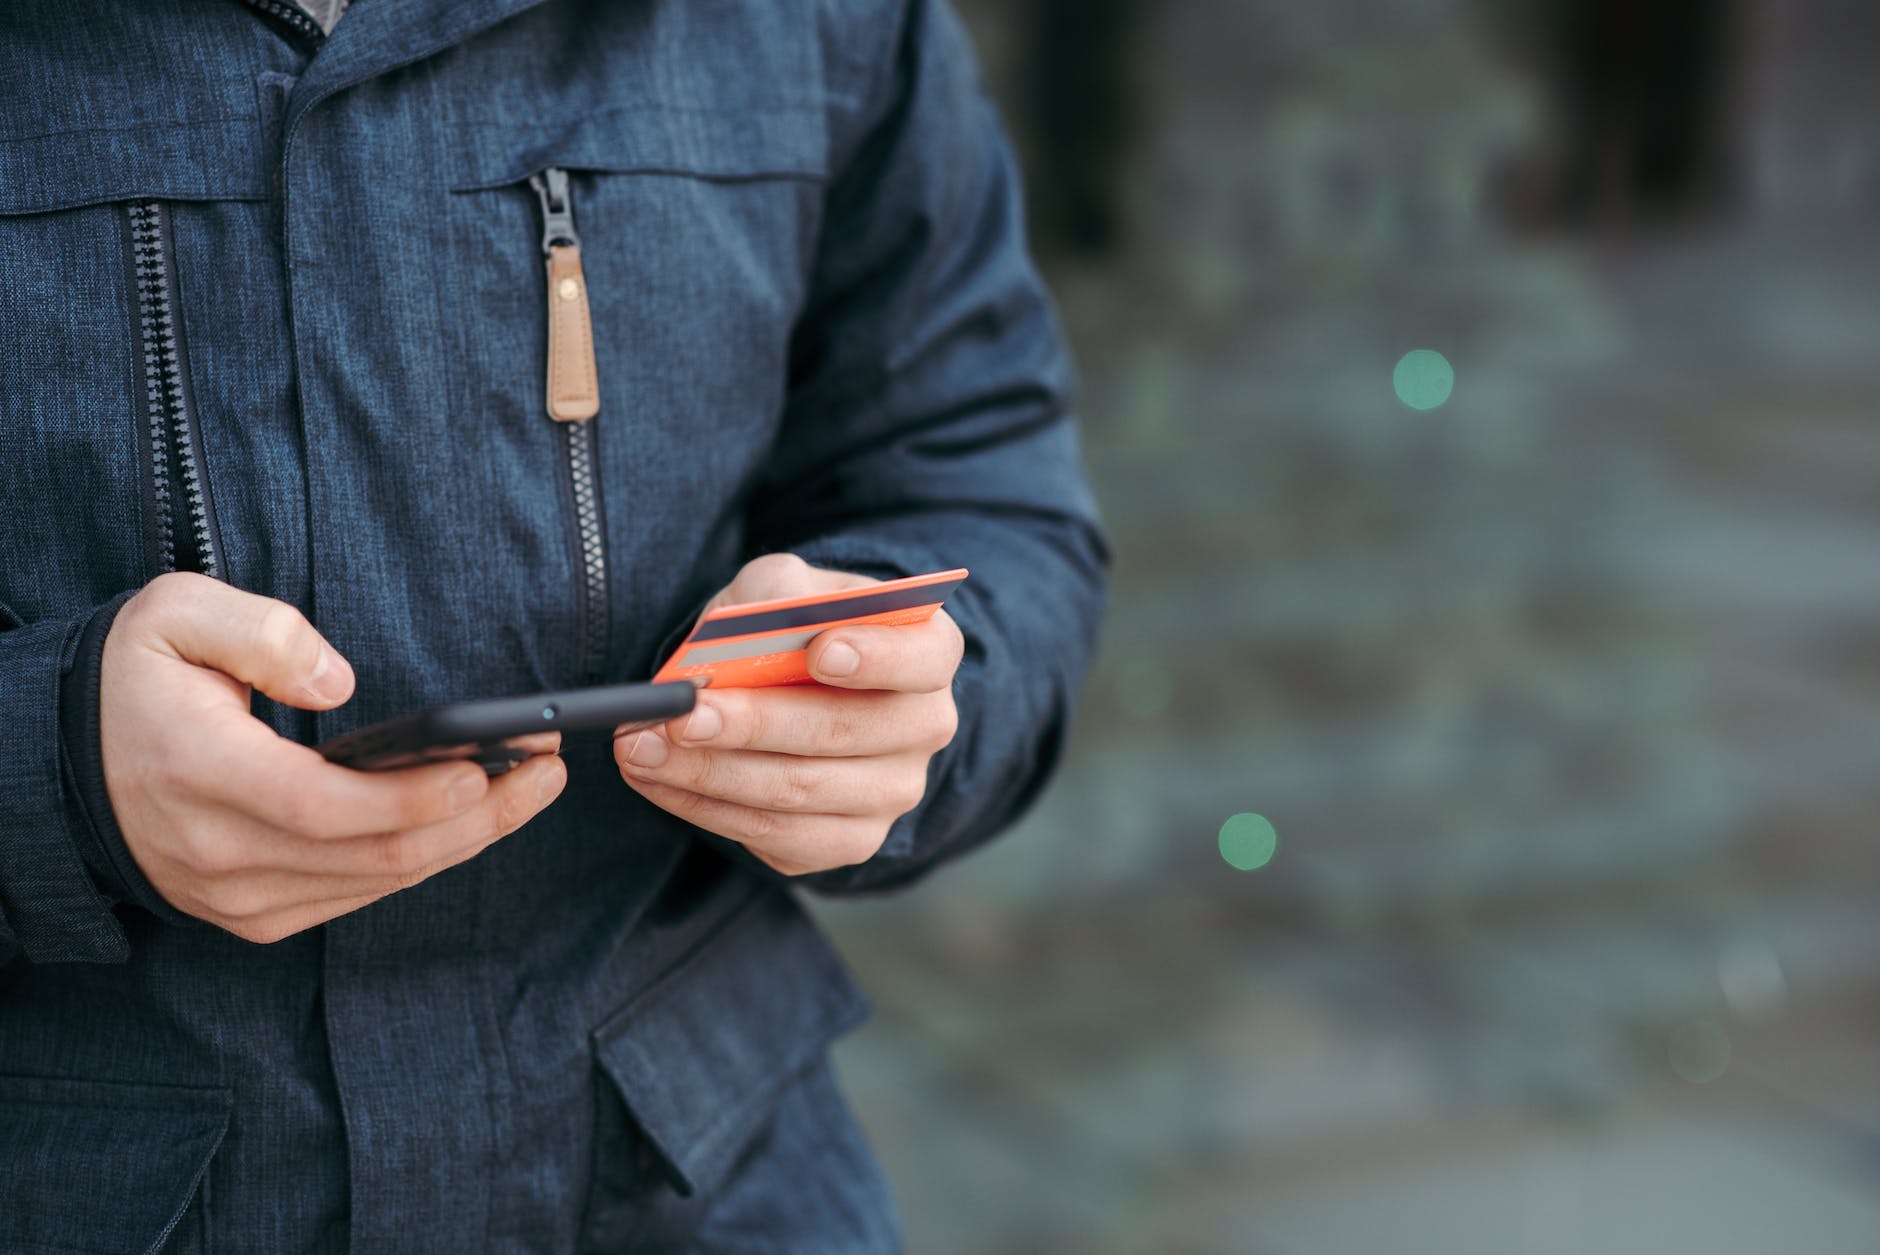 man holding credit card and browsing smartphone on street